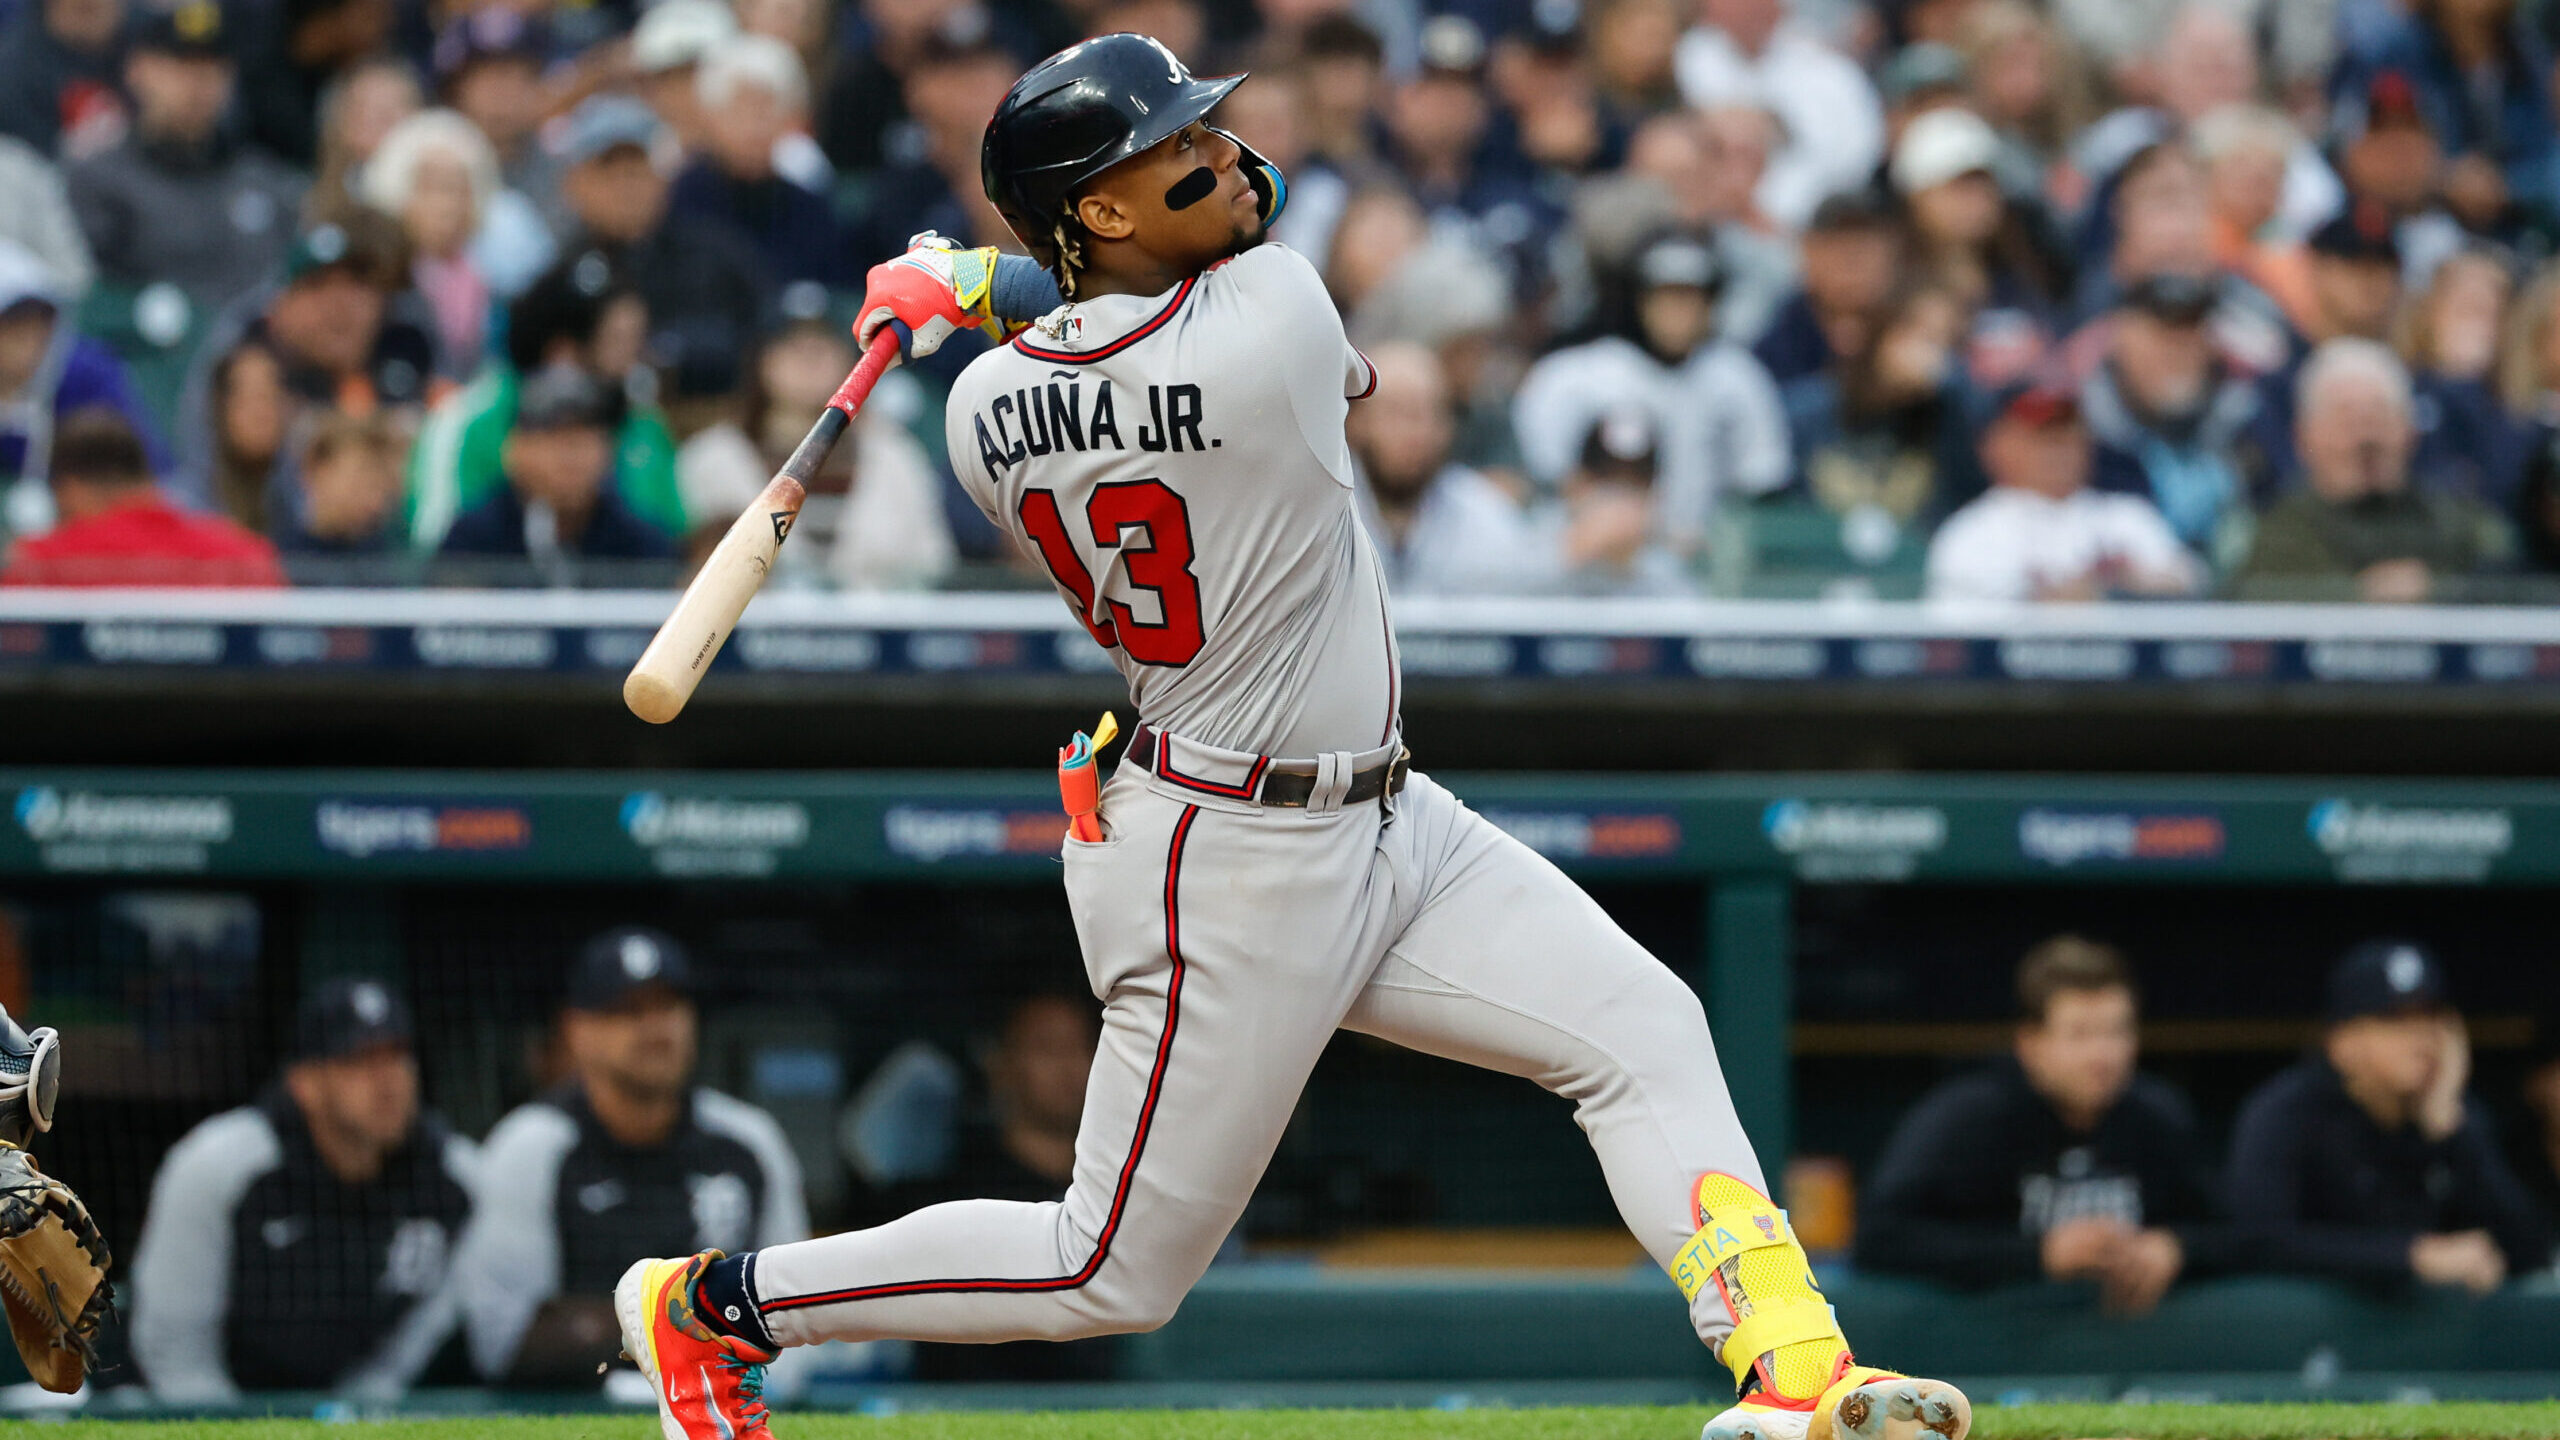 2021 Atlanta Braves World Series, win total, pennant and division odds